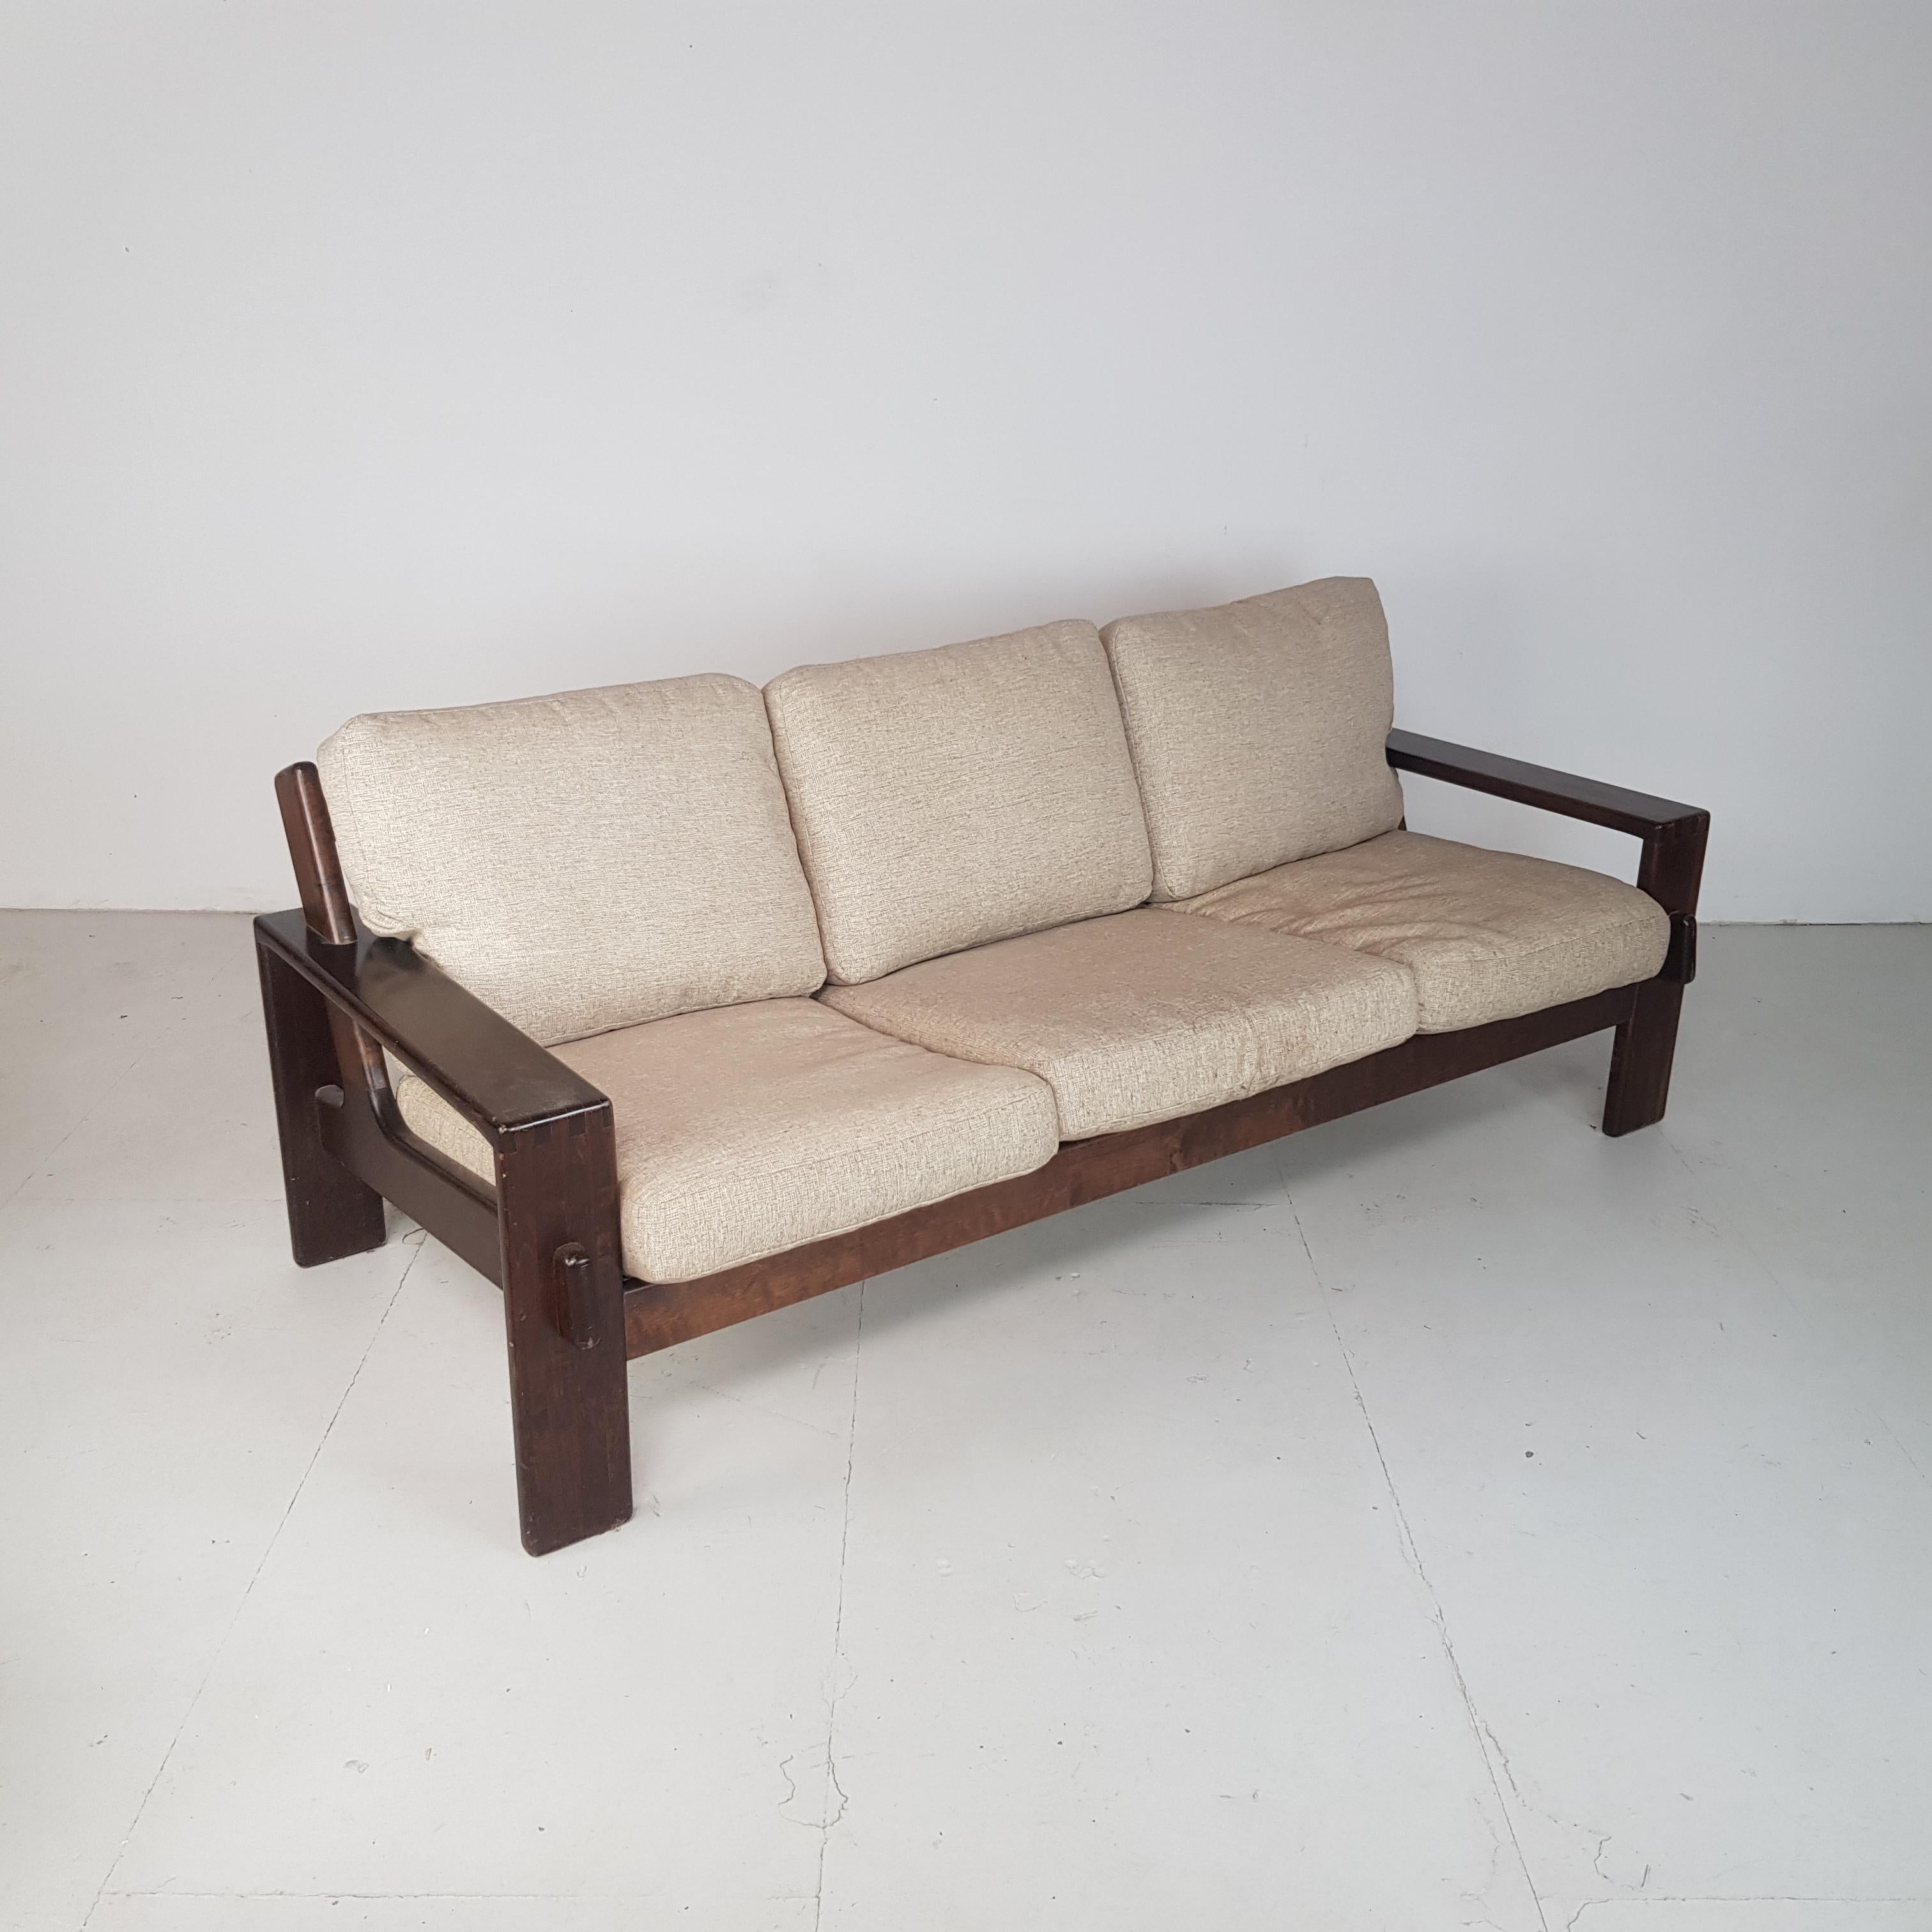 Vintage 1960s 3-seat Bonanza sofa designed by Esko Pajamies for Asko Finland.
This piece is in good vintage condition. The stained oak frame is solid and sturdy. There are a few scuffs, scratches and marks to be expected with age but nothing which